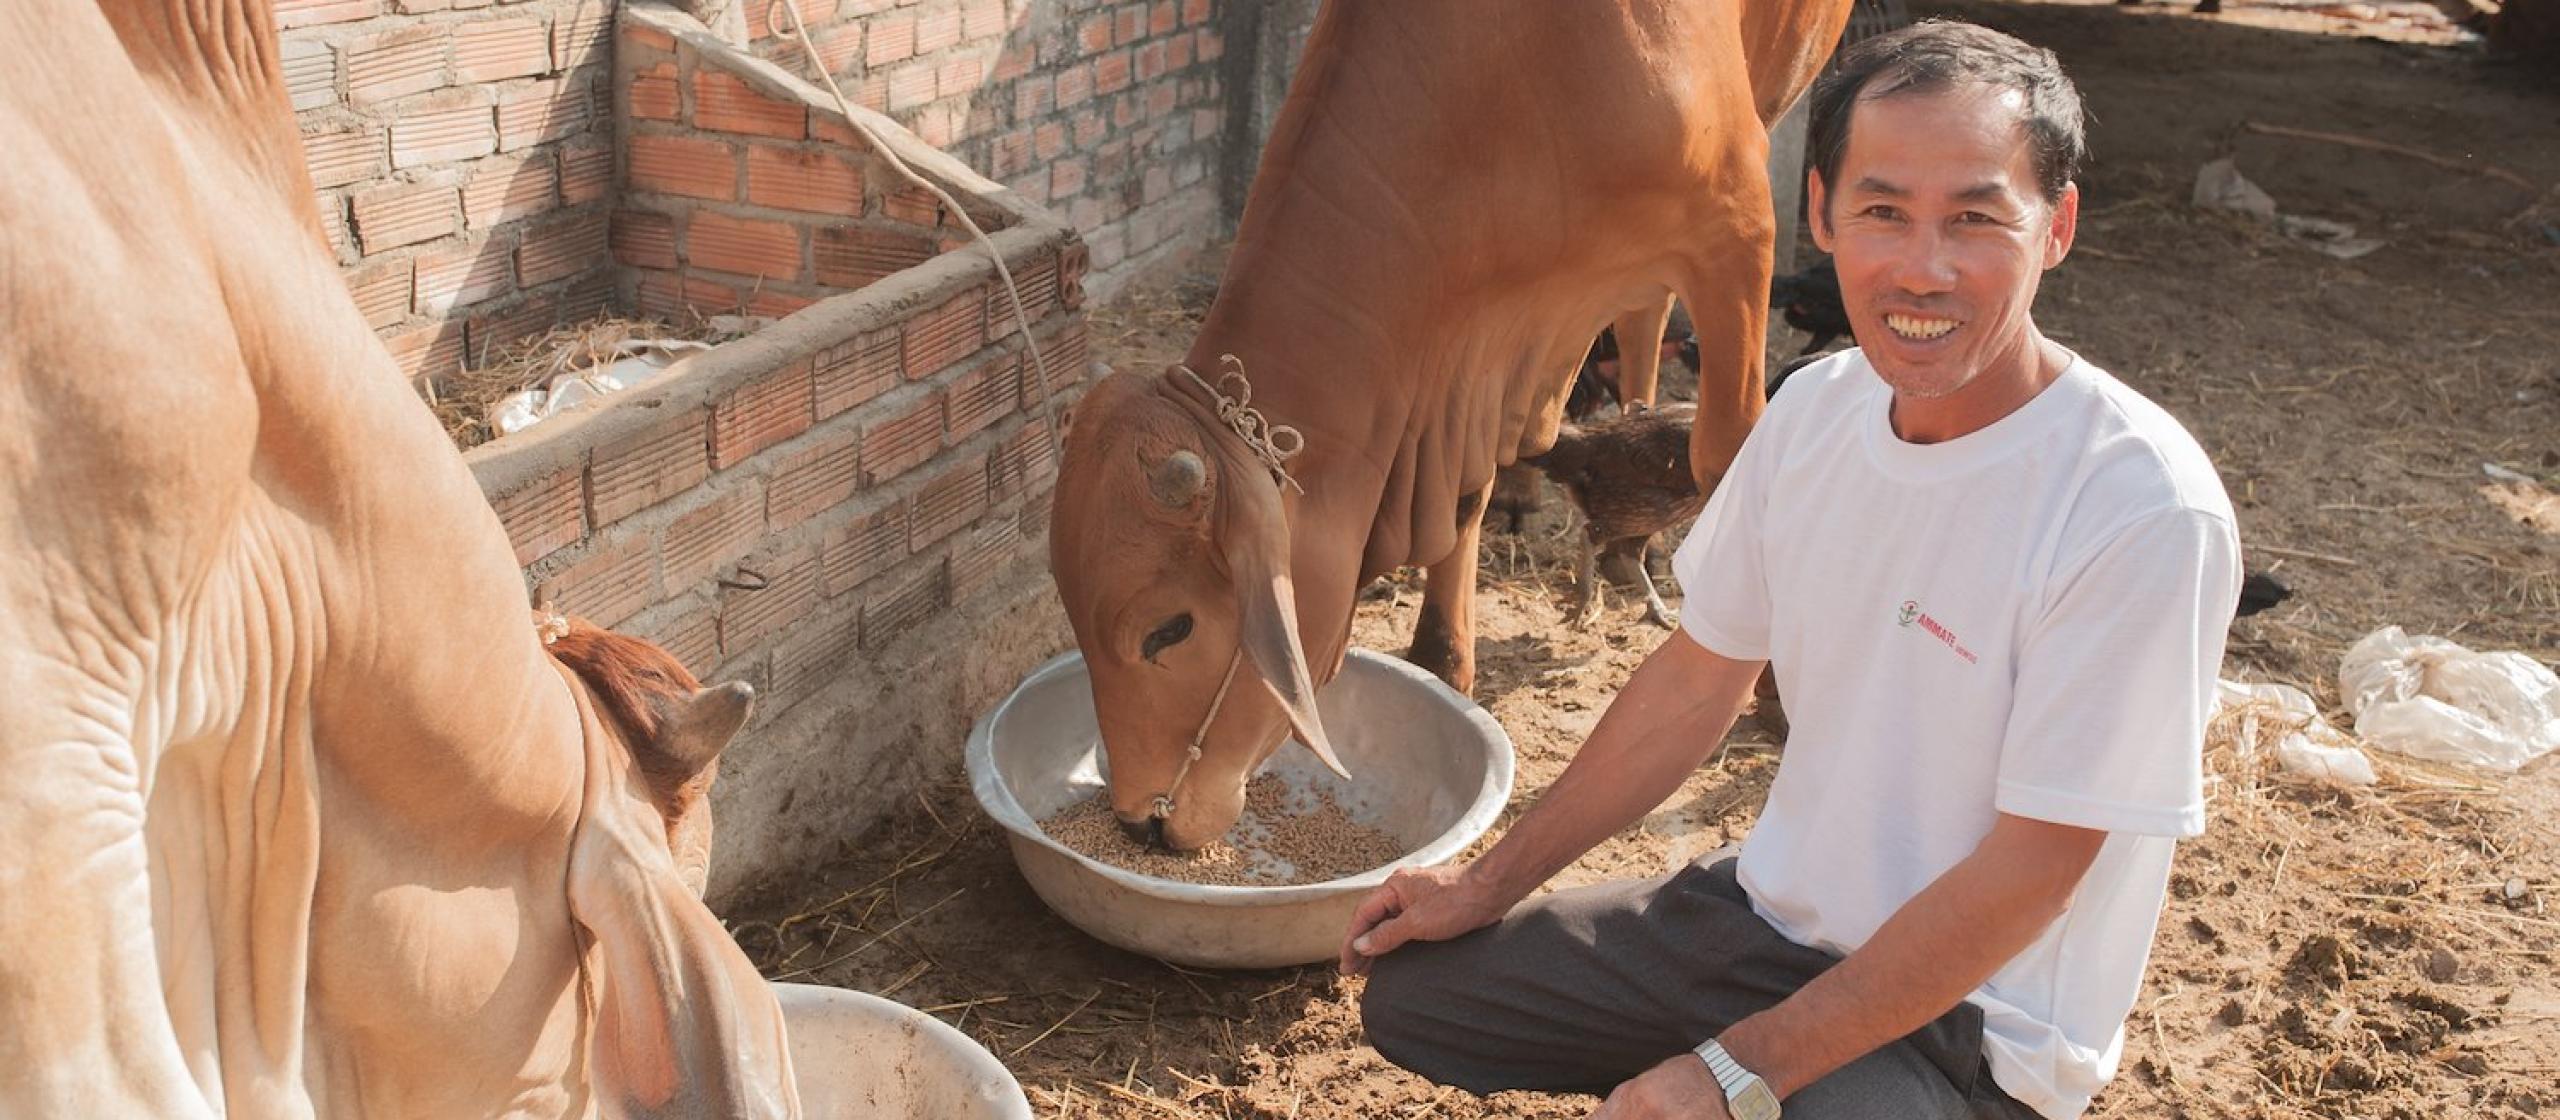 Man with two cows eating grain from bowls